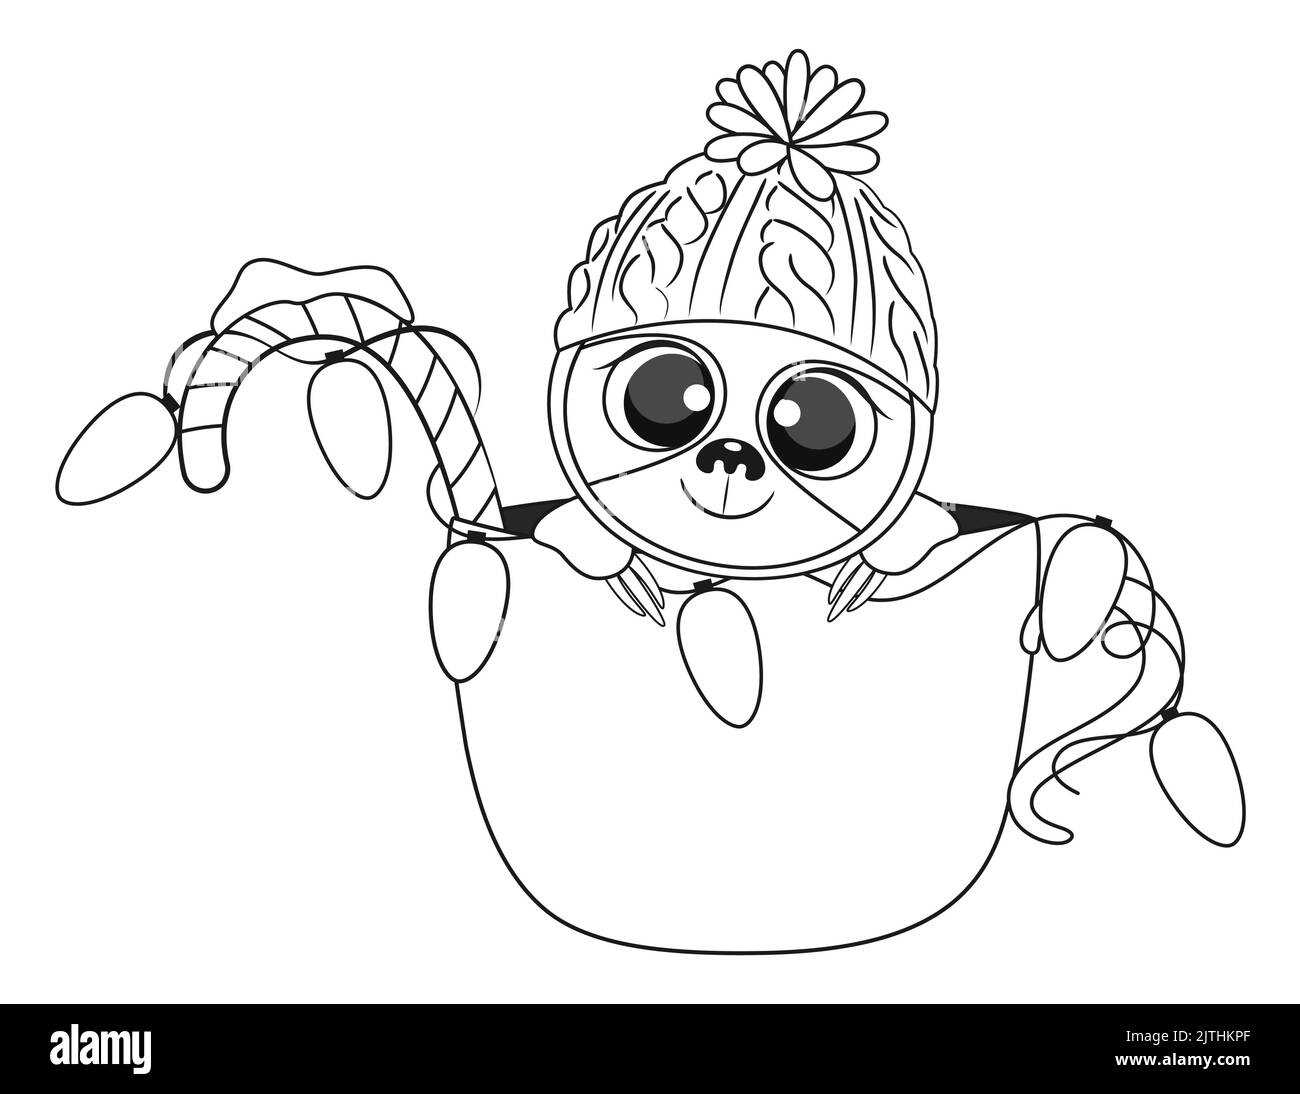 Christmas baby sloth colouring book page.  Stock Vector